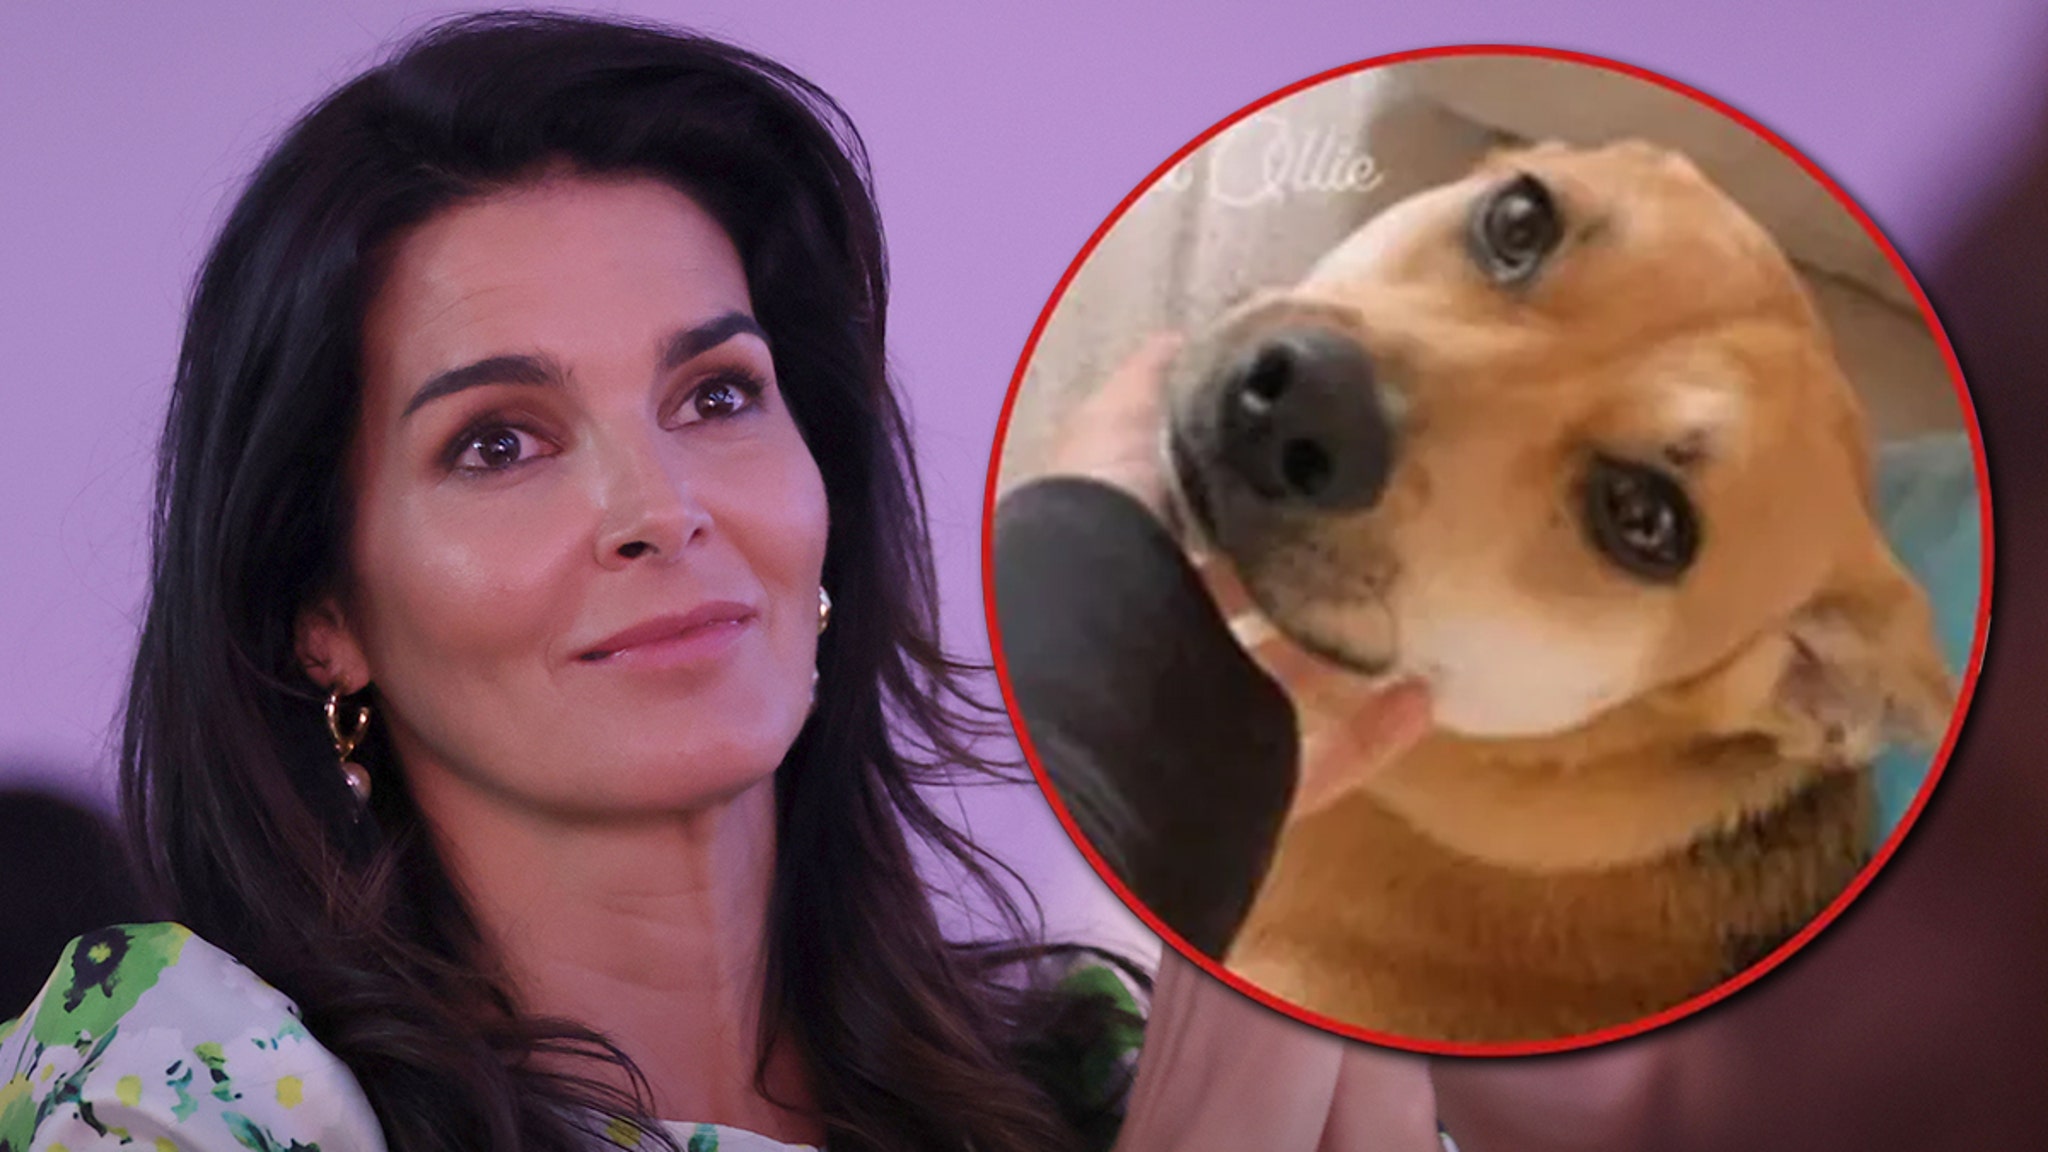 Actress Angie Harmon Sues Instacart and Delivery Driver After Her Dog is Shot and Killed on Her Property